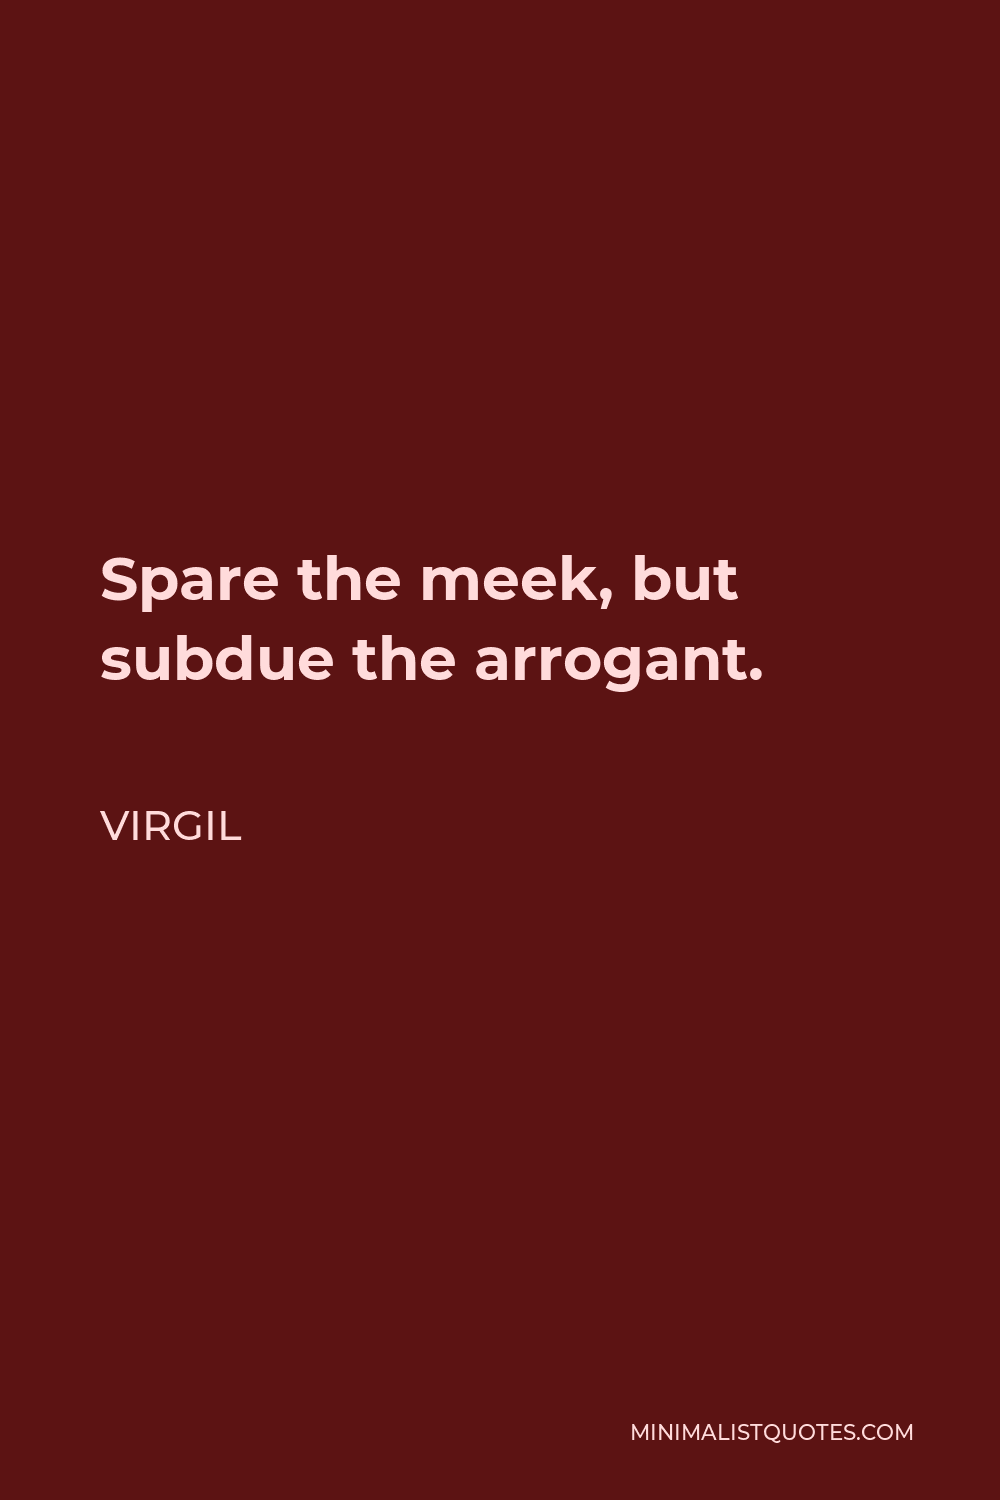 Virgil Quote - Spare the meek, but subdue the arrogant.